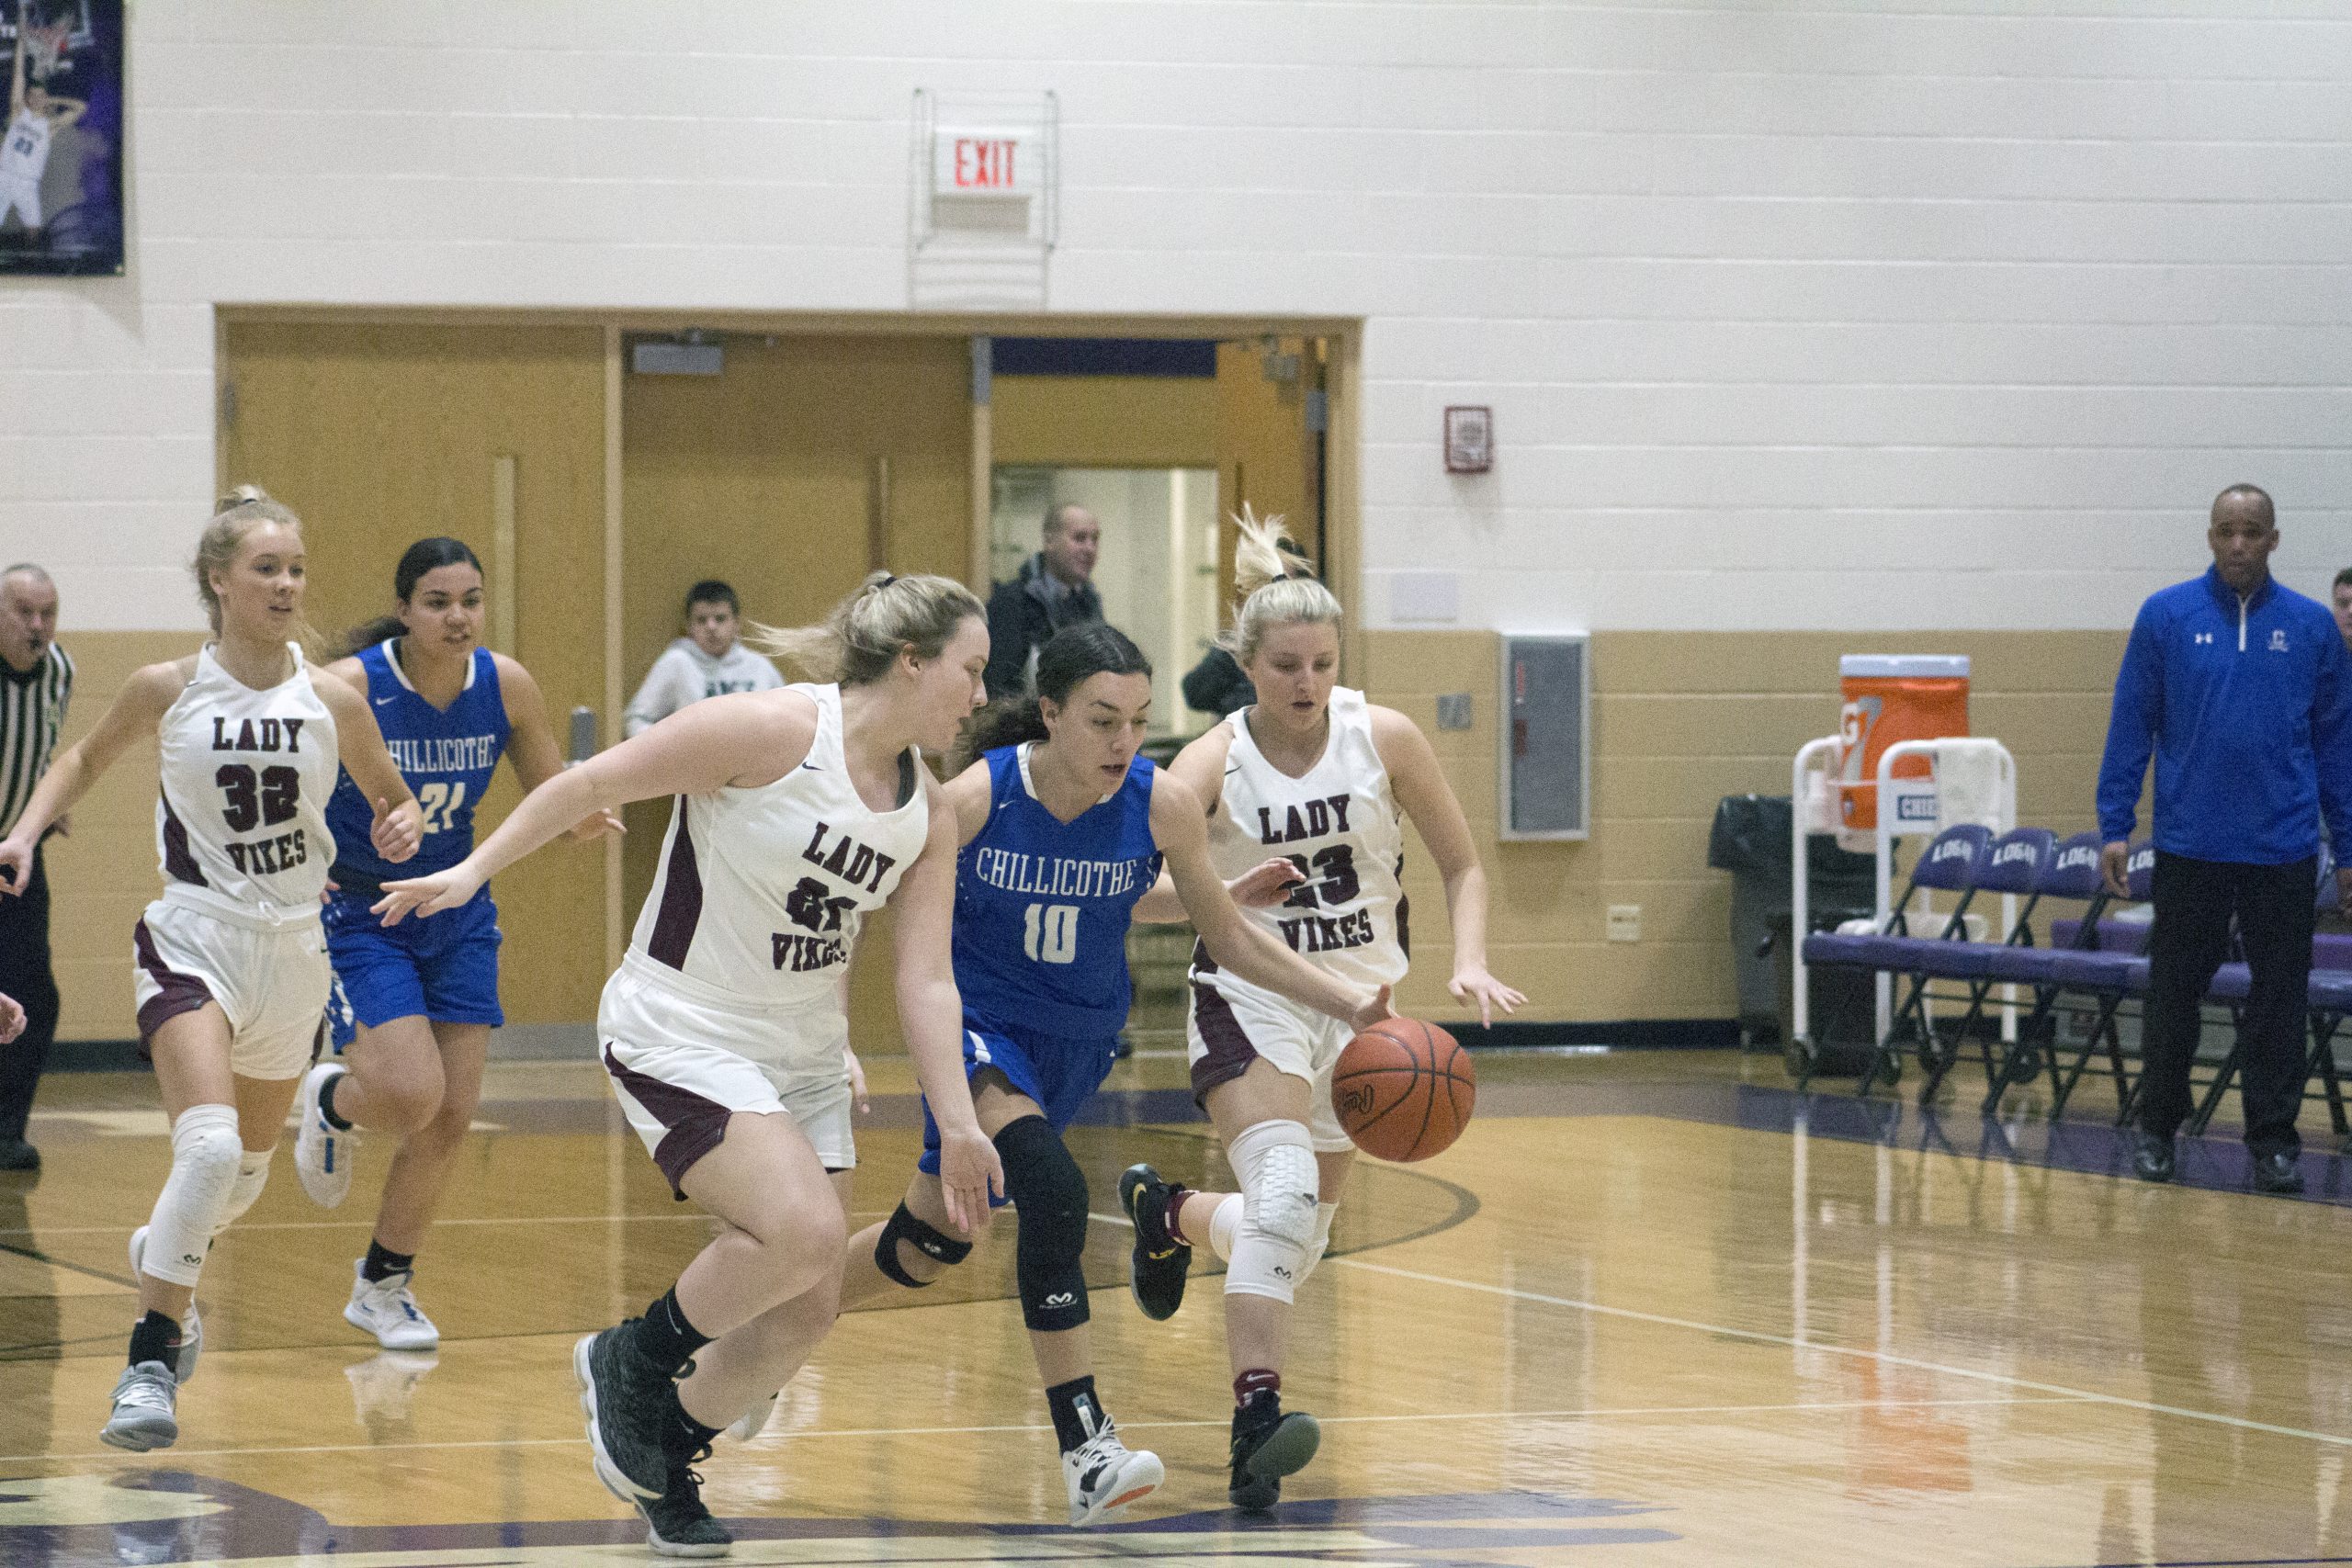 Vinton County Lady Vikings Chillicothe Lady Cavaliers